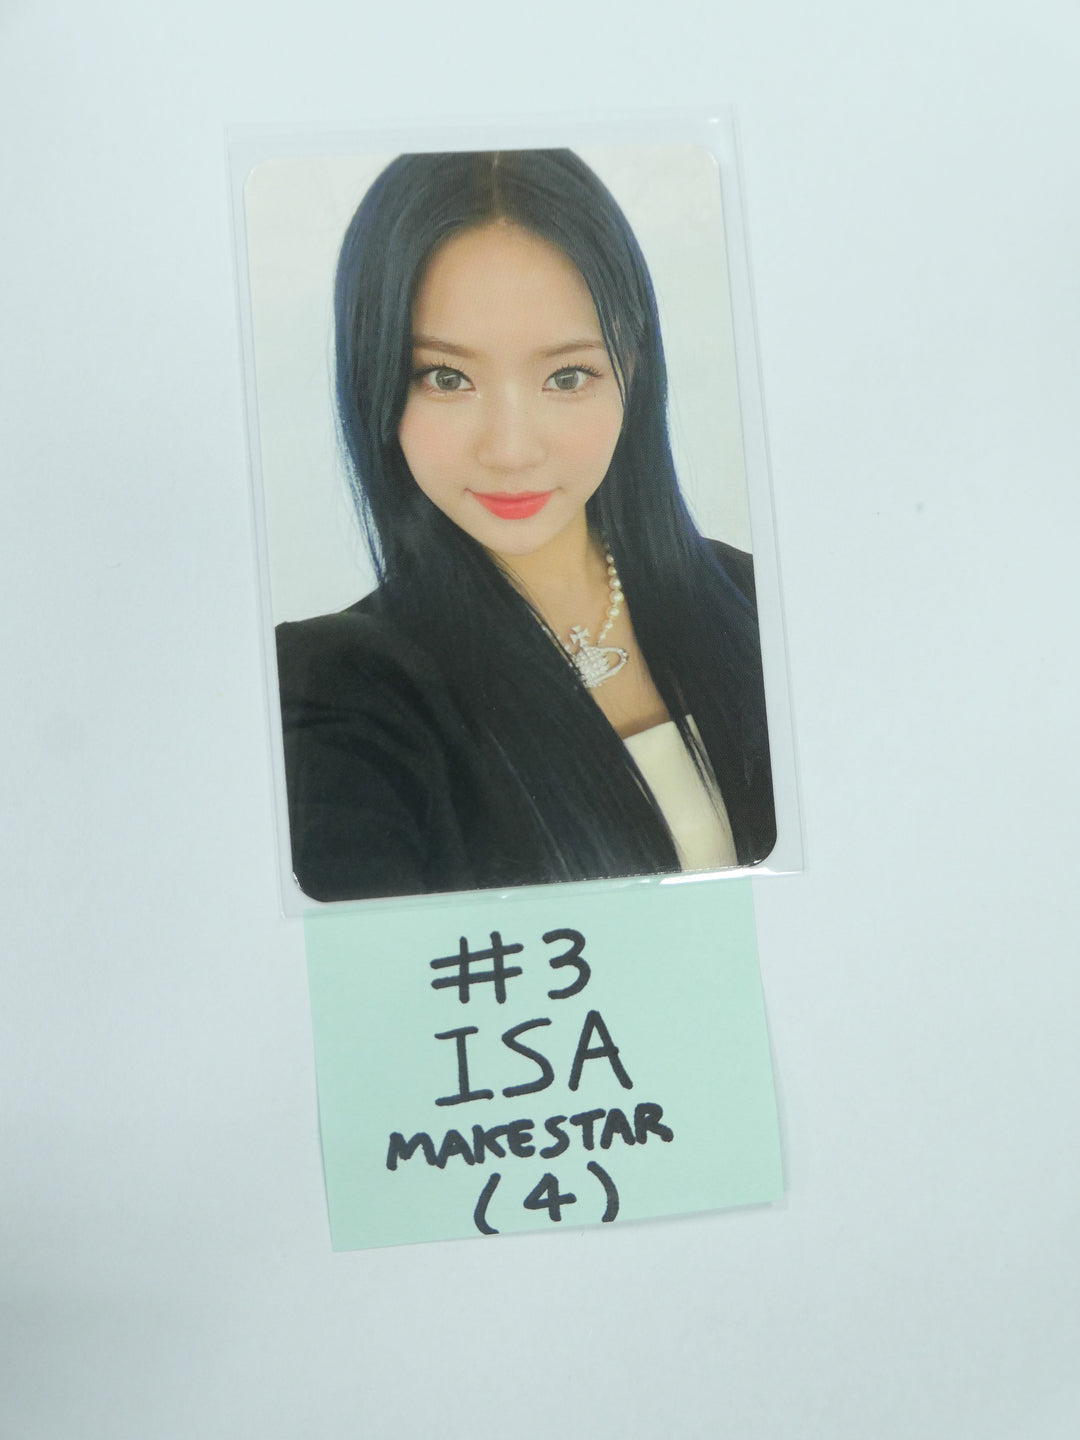 StayC 'STEREOTYPE' - Makestar Fansign Event Photocard Round 4